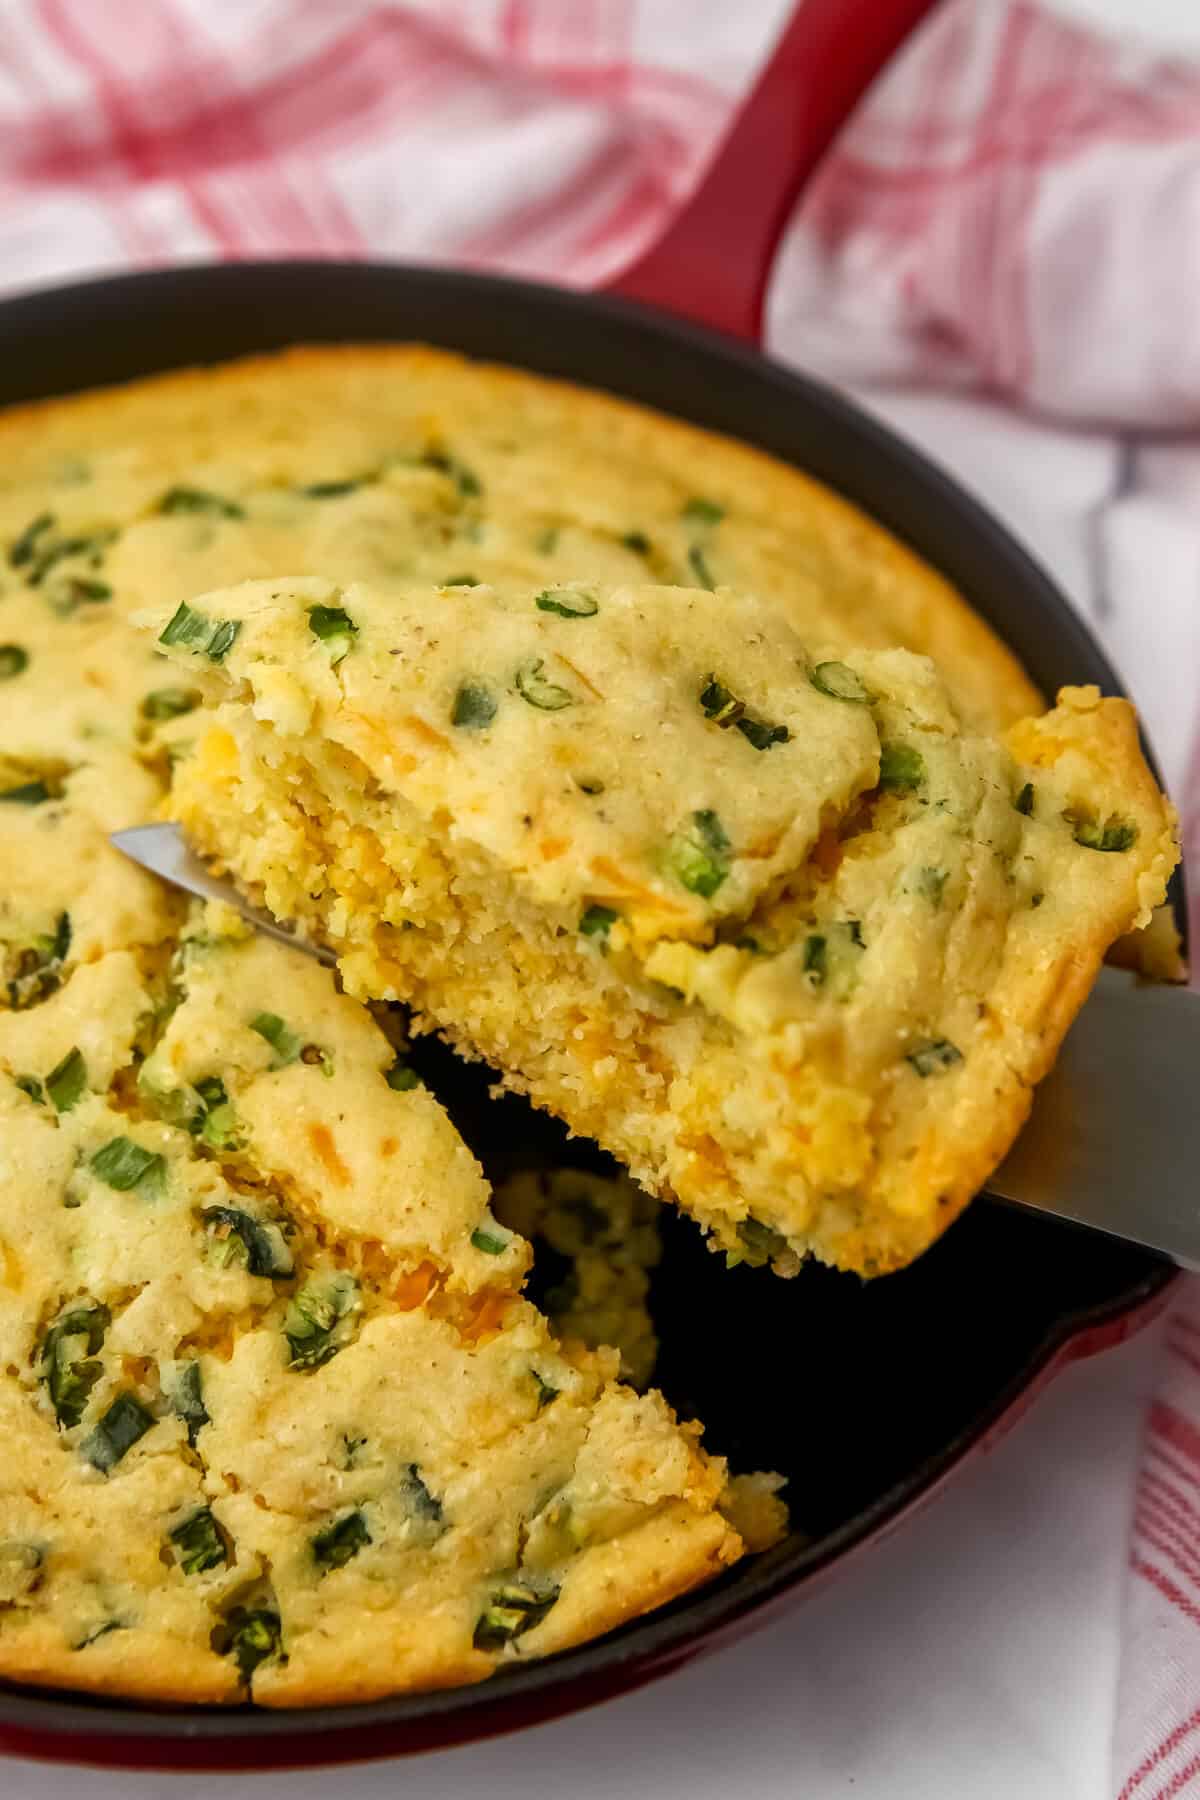 A vegan jalapeno cornbread baked in a red iron skillet with a piece being taken out.